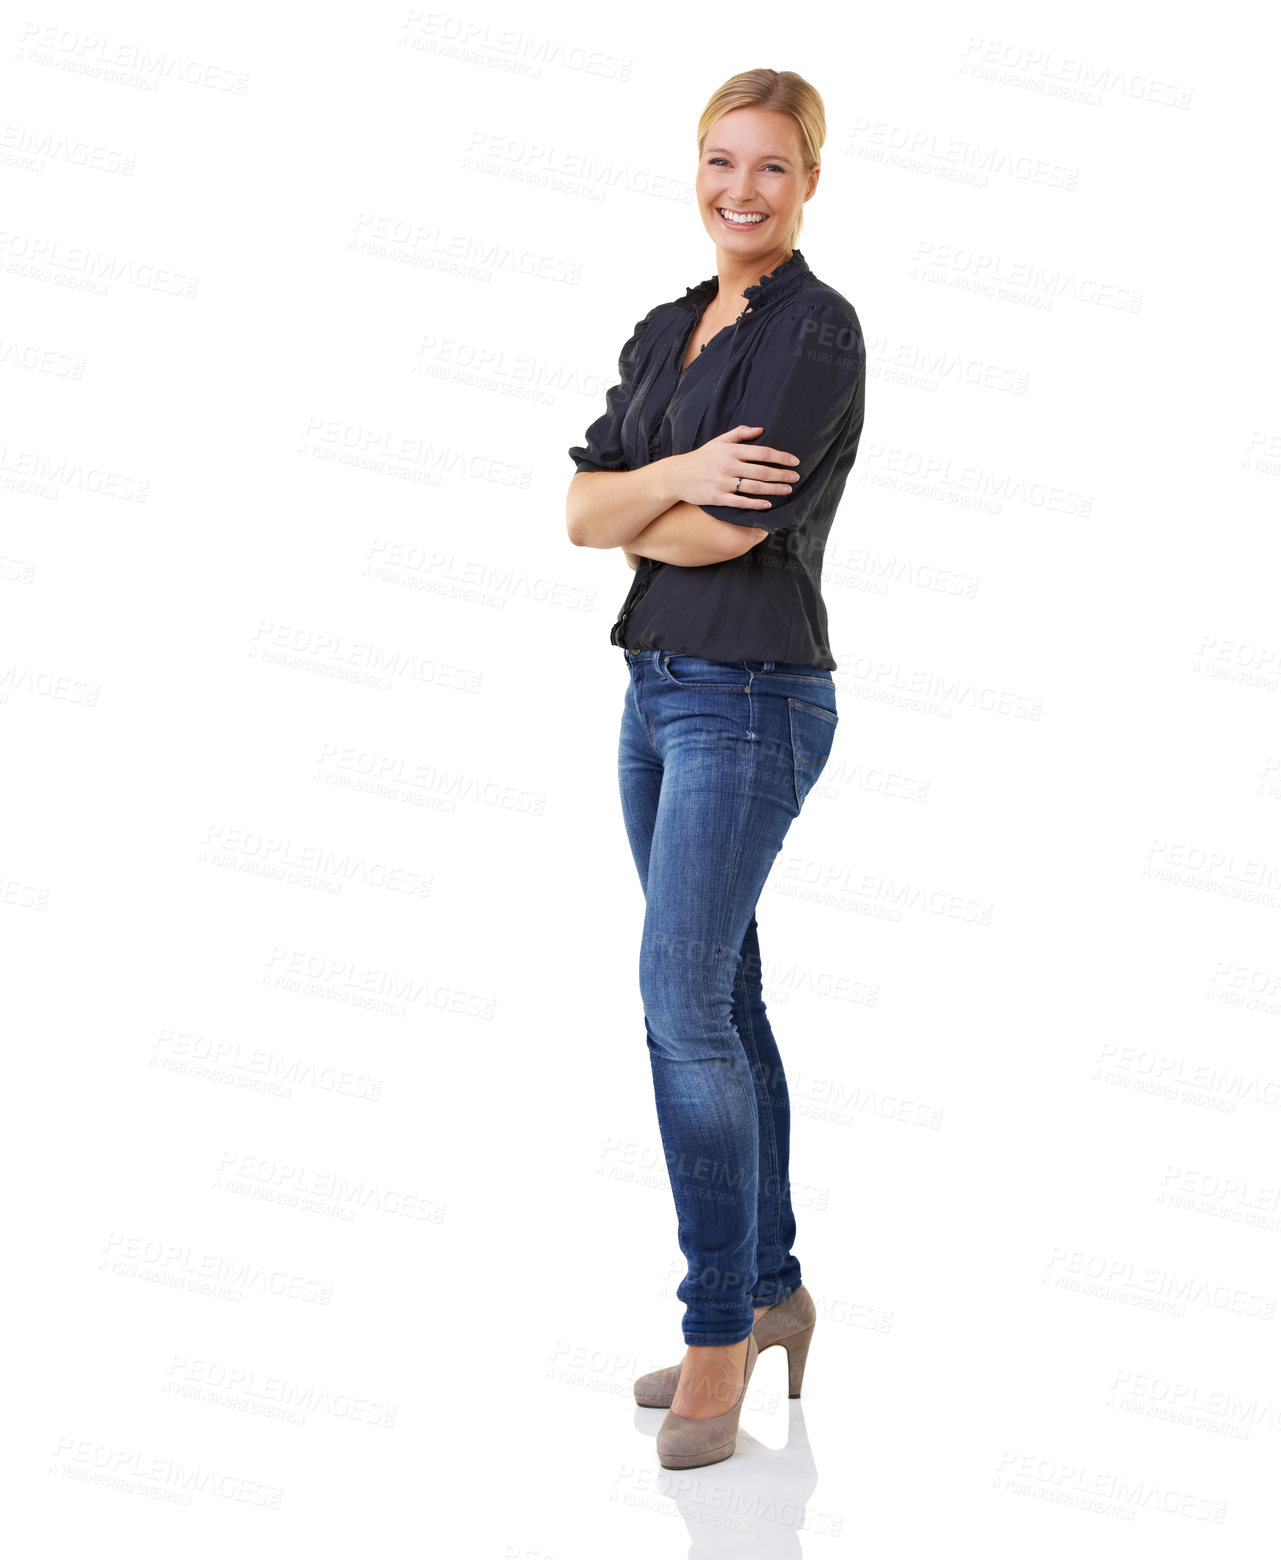 Buy stock photo Full length studio shot of a young woman with her arms crossed isolated on white